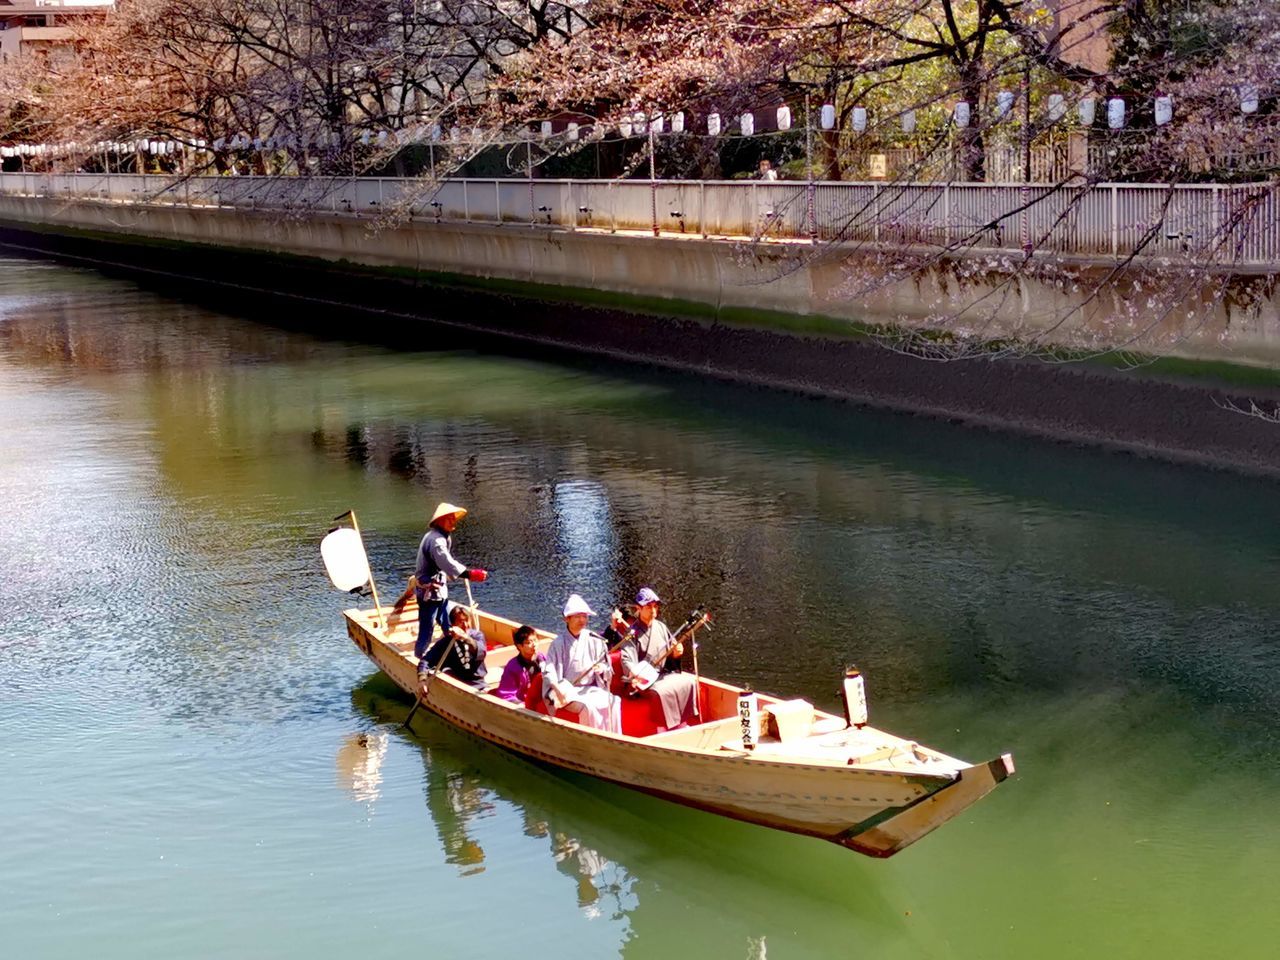 water, nautical vessel, transportation, river, mode of transportation, group of people, men, boat, nature, vehicle, tree, adult, boating, plant, women, travel, day, lifestyles, reflection, canoe, watercraft, leisure activity, waterway, waterfront, outdoors, sitting, group, togetherness, travel destinations, person, holiday, tourism